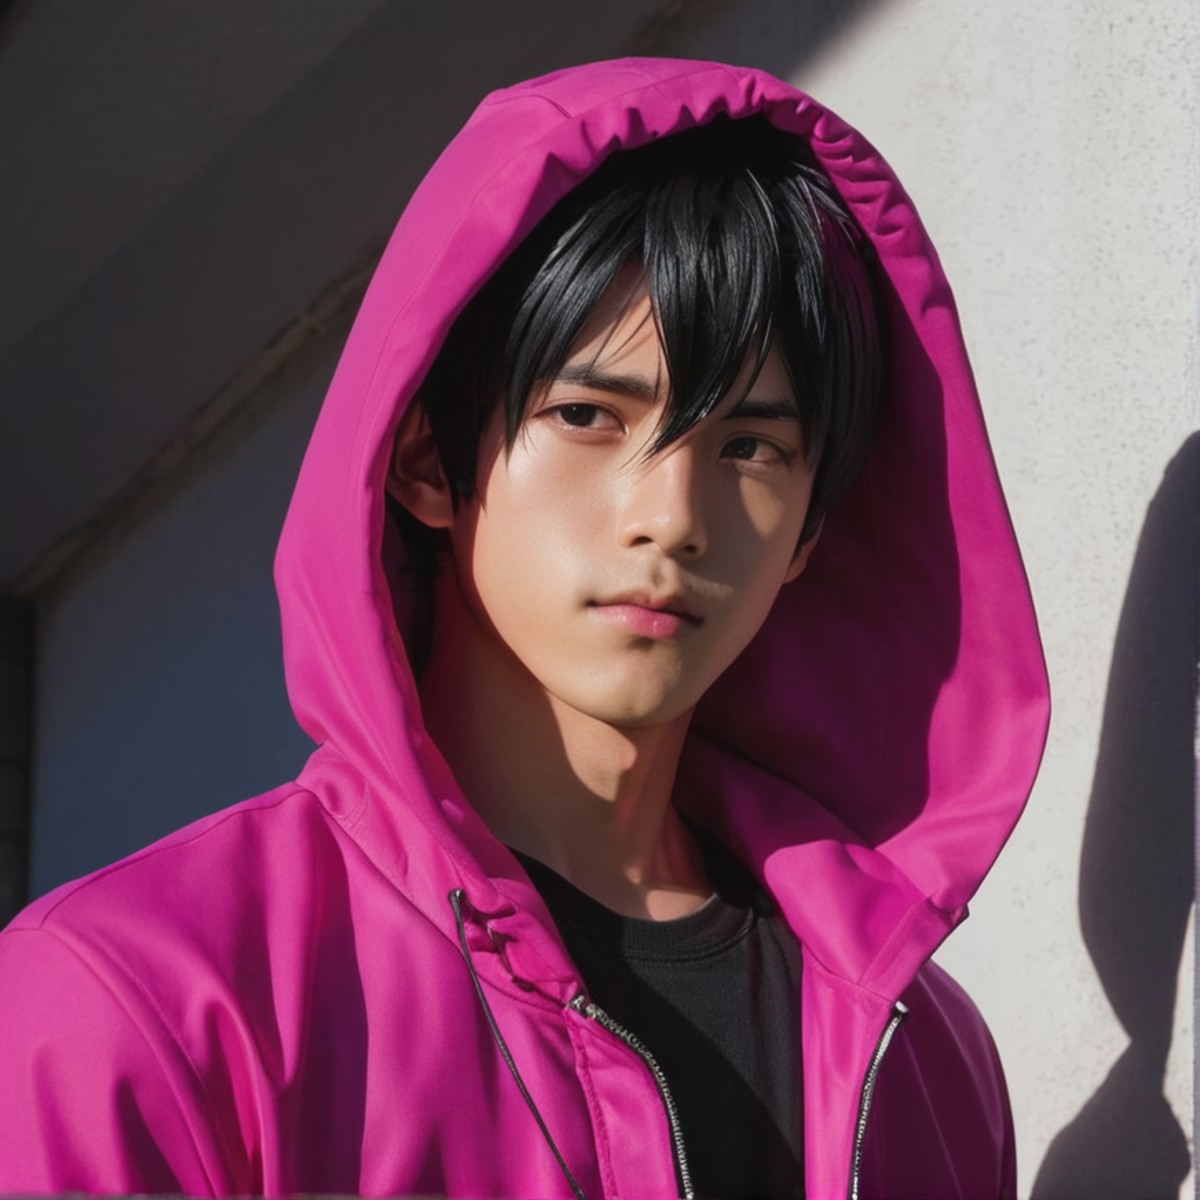 anime, black-haired anime boy wearing a magenta hooded jacket, revealing only the right side of his face while the left si...